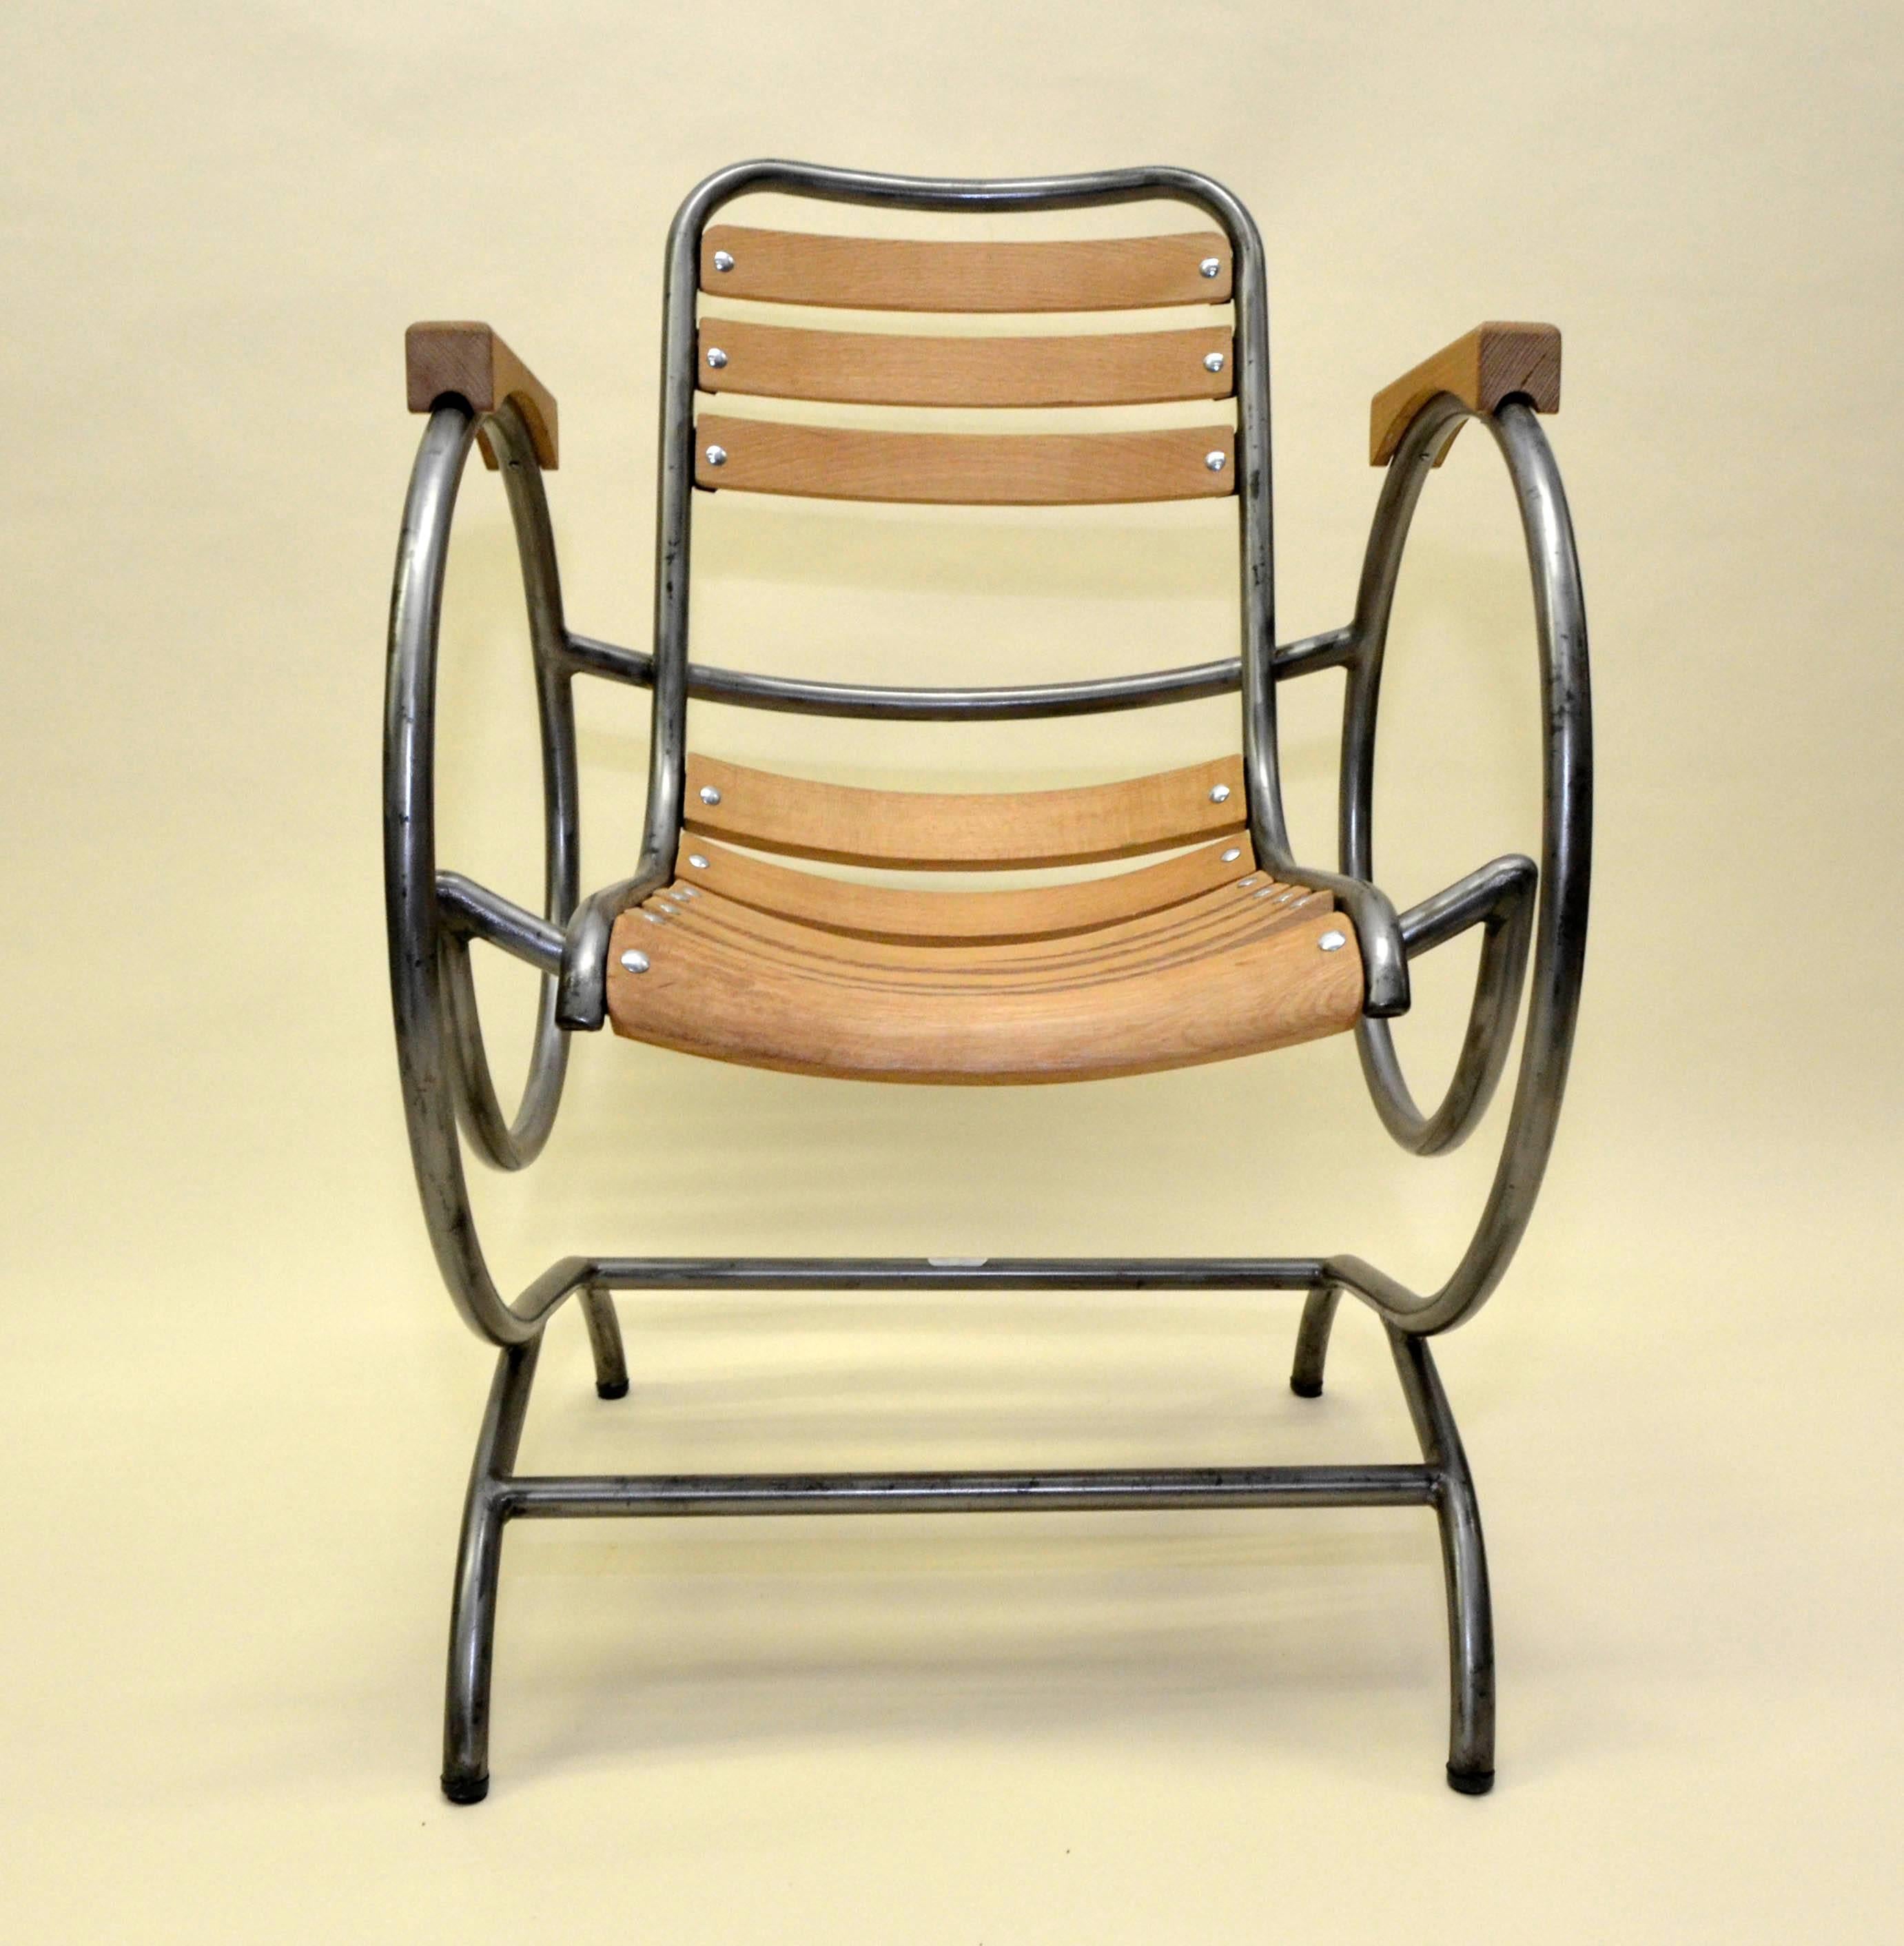 Very rare Flexi-Tube armchair also known as 'escargot' for the typical curved tubular sides. Originally conceived as garden armchair was designed in the 1950s by Lucien Illy in Nyons, in the southeastern France Drôme department. The Flexi-Tube